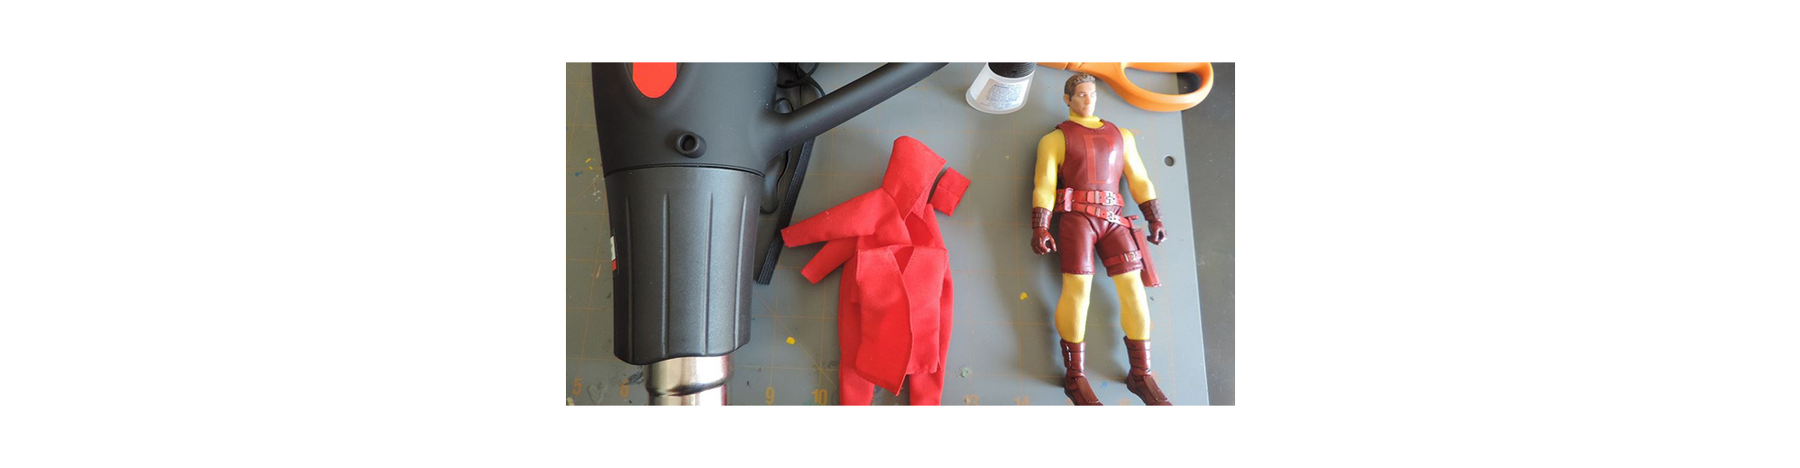 Tools for Customizing Action Figures